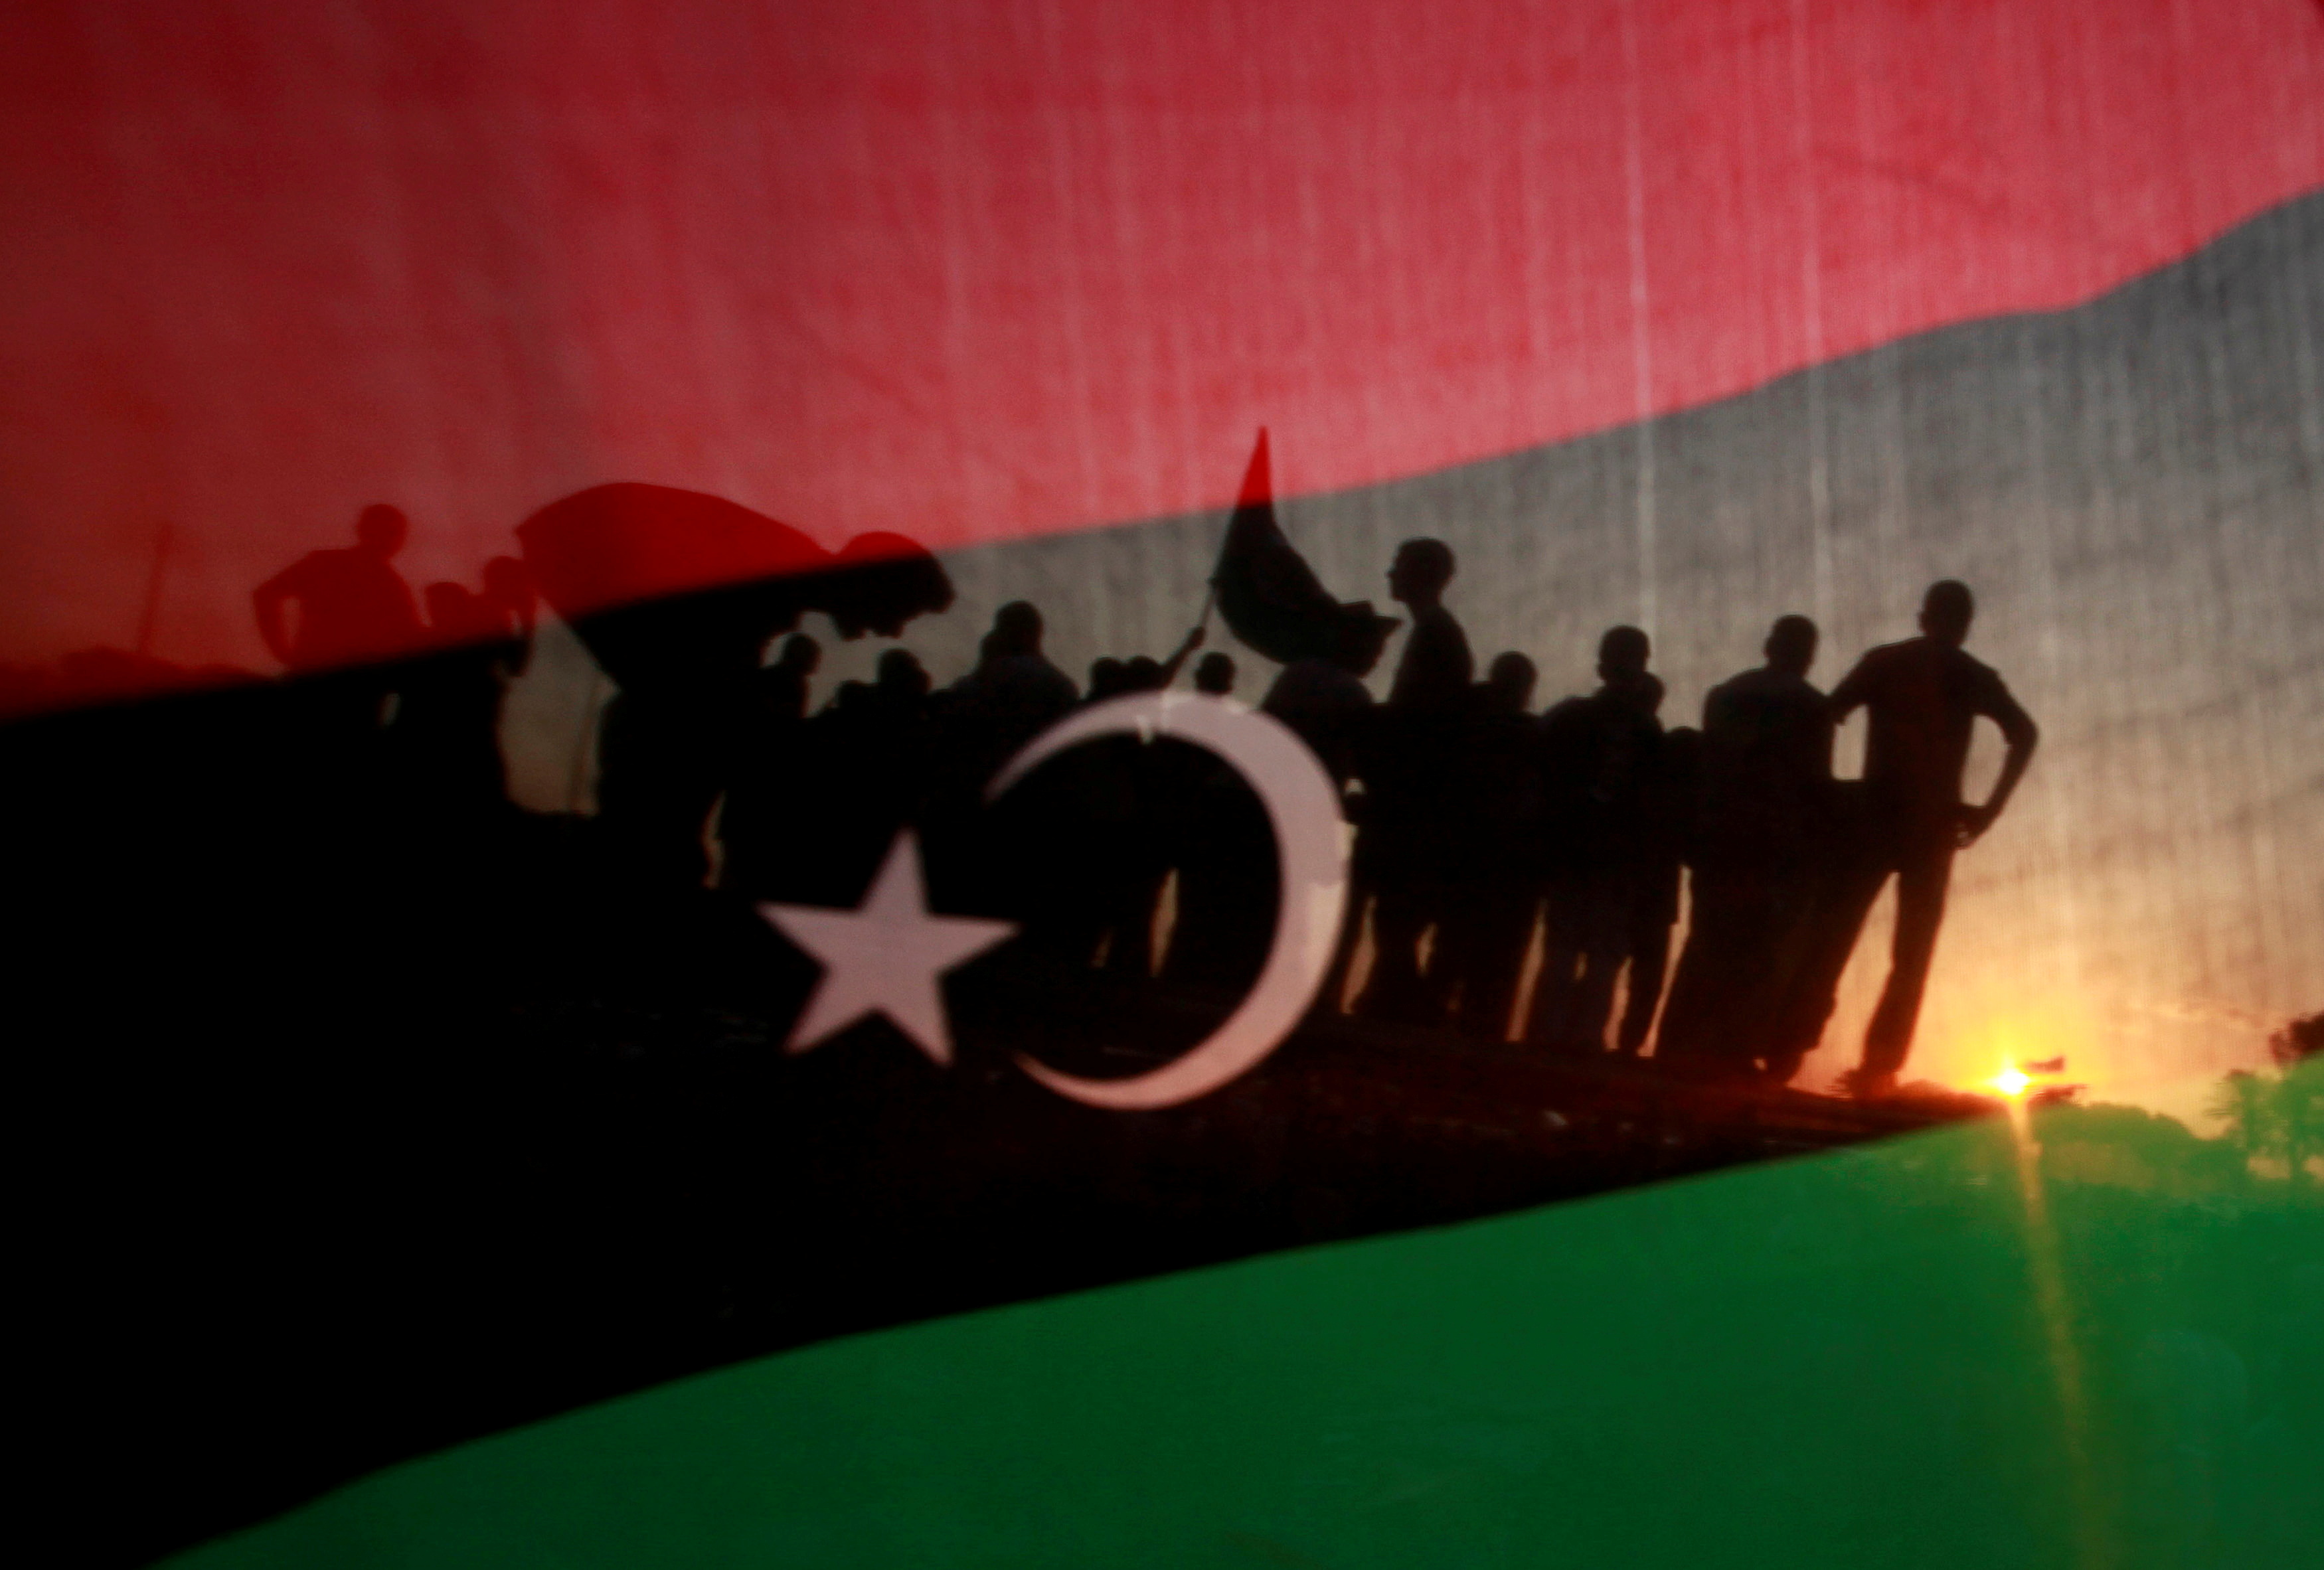 Libyans are seen through a Kingdom of Libya flag during a celebration rally in front of the residence of Muammar Gaddafi at the Bab al-Aziziyah complex in Tripoli